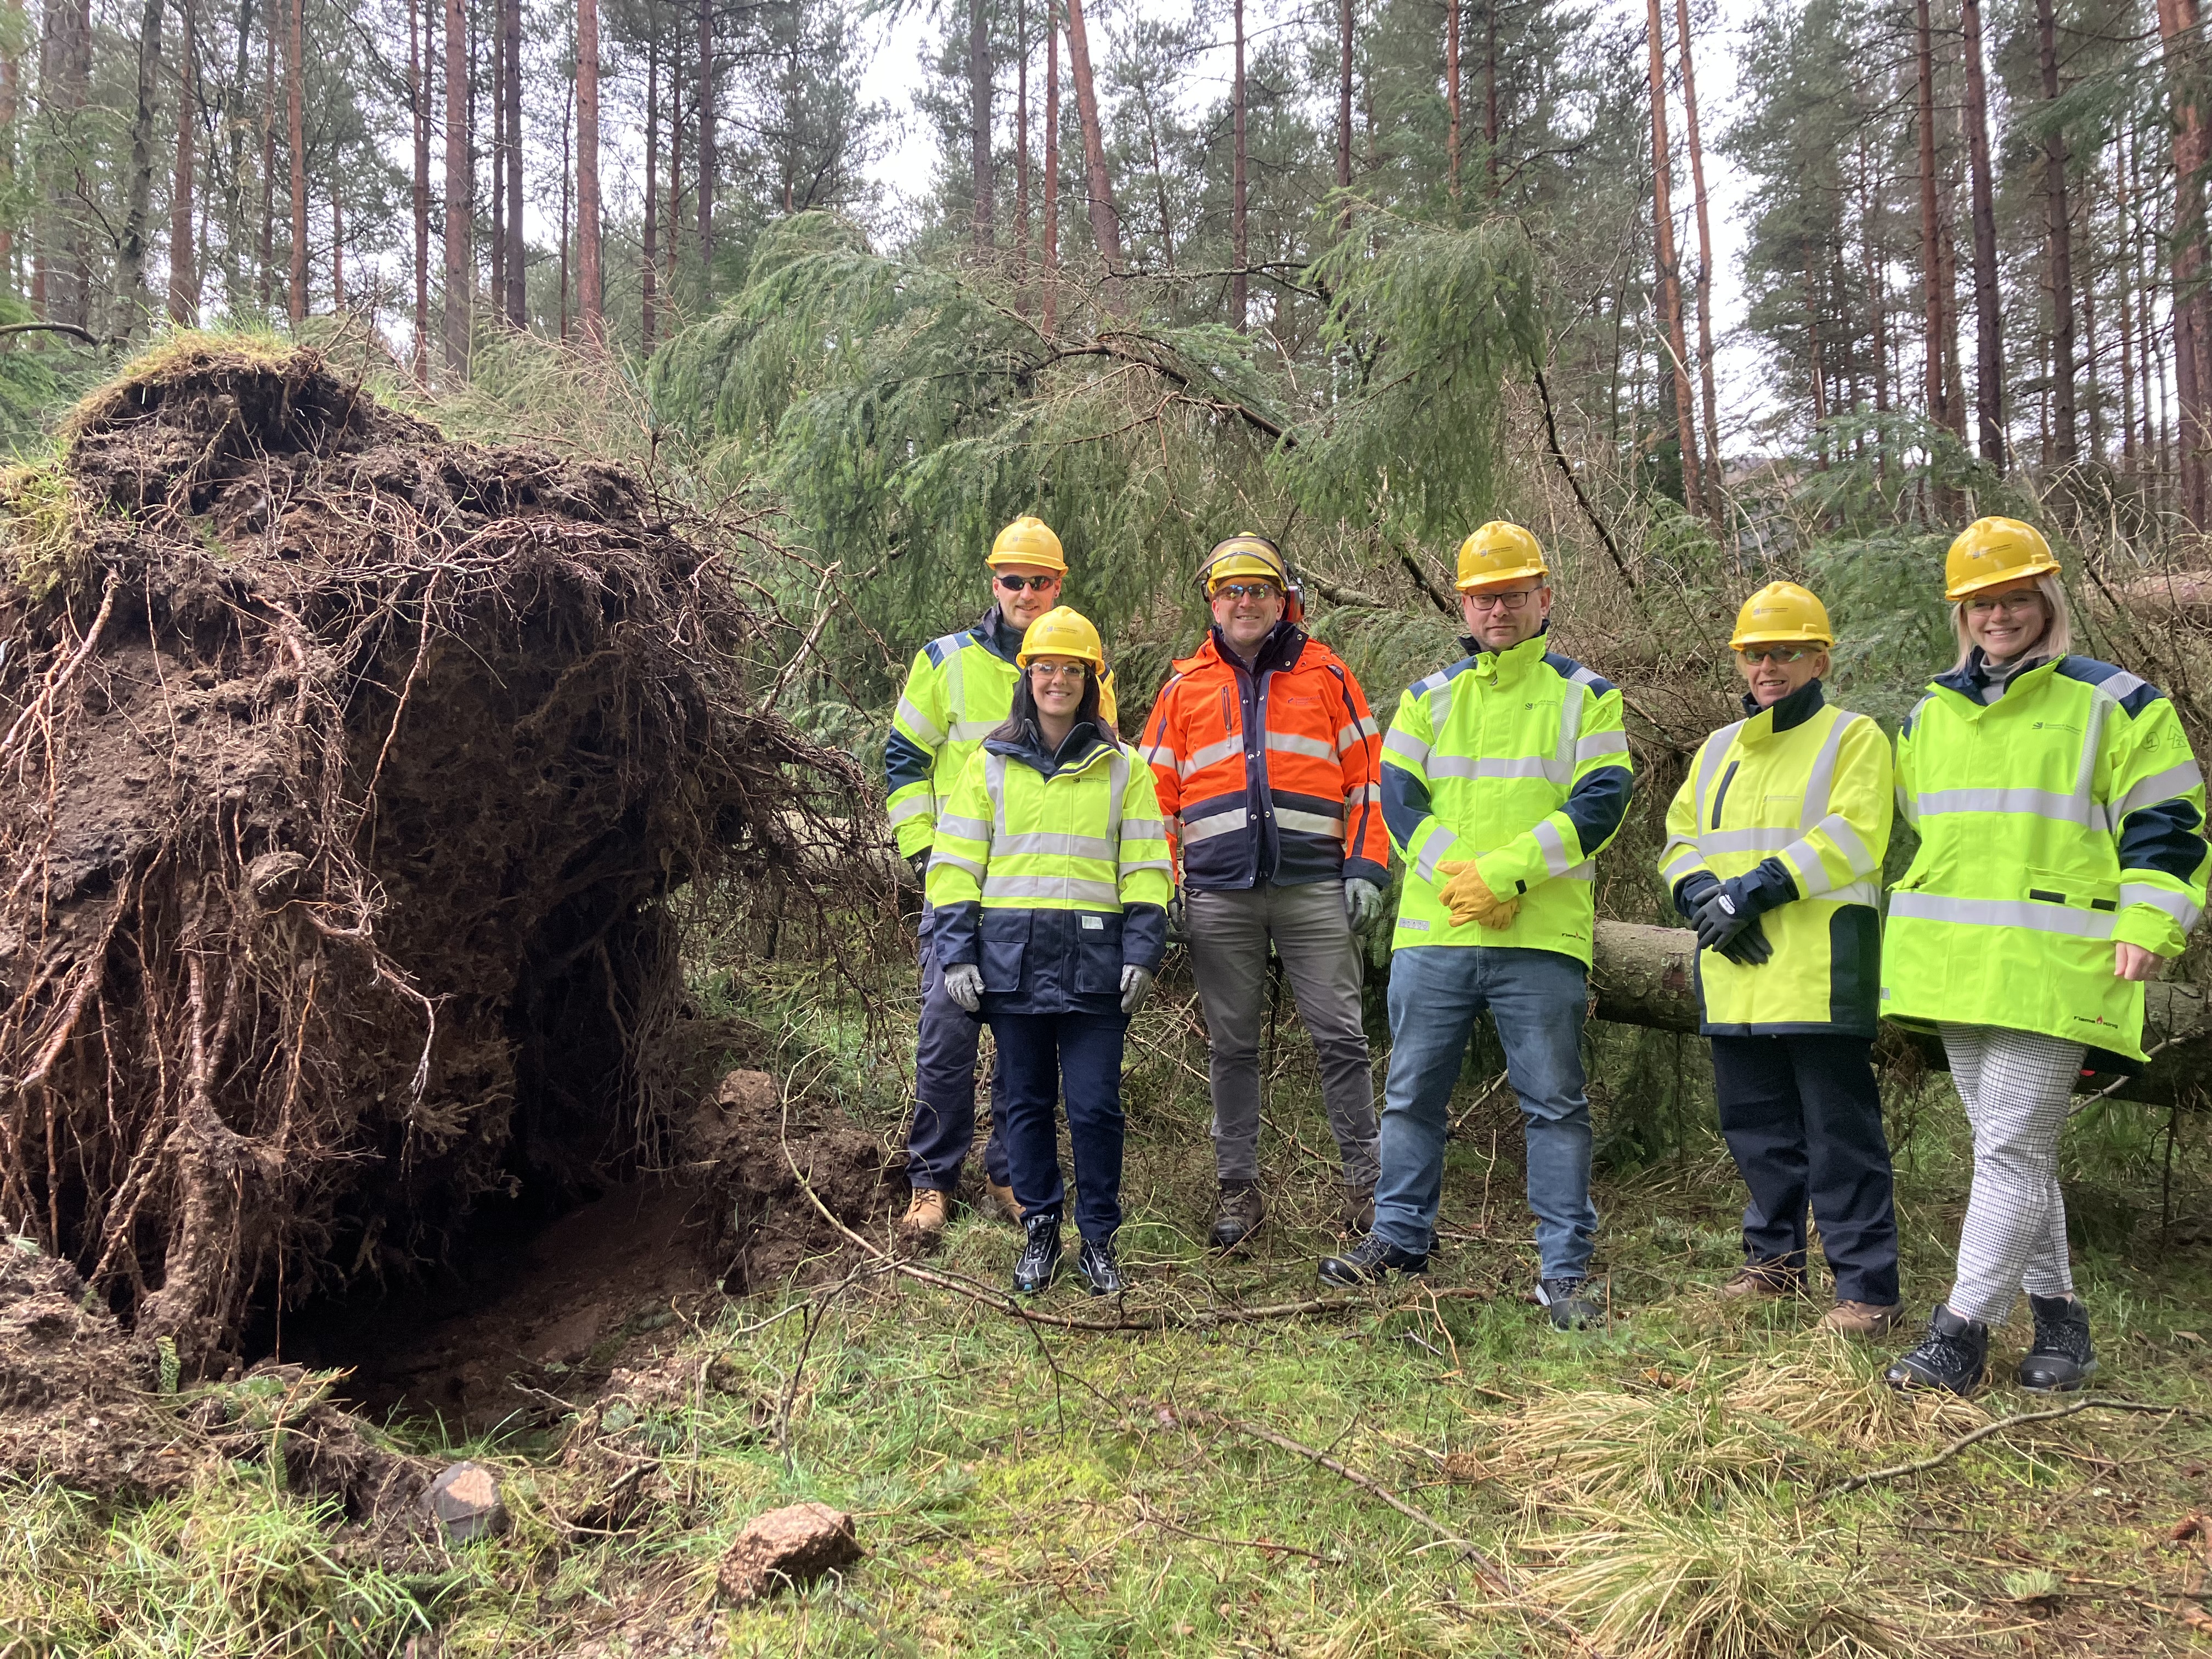 Richard Thomson MP meets with SSEN colleagues at Pitfichie Forest in Aberdeenshire